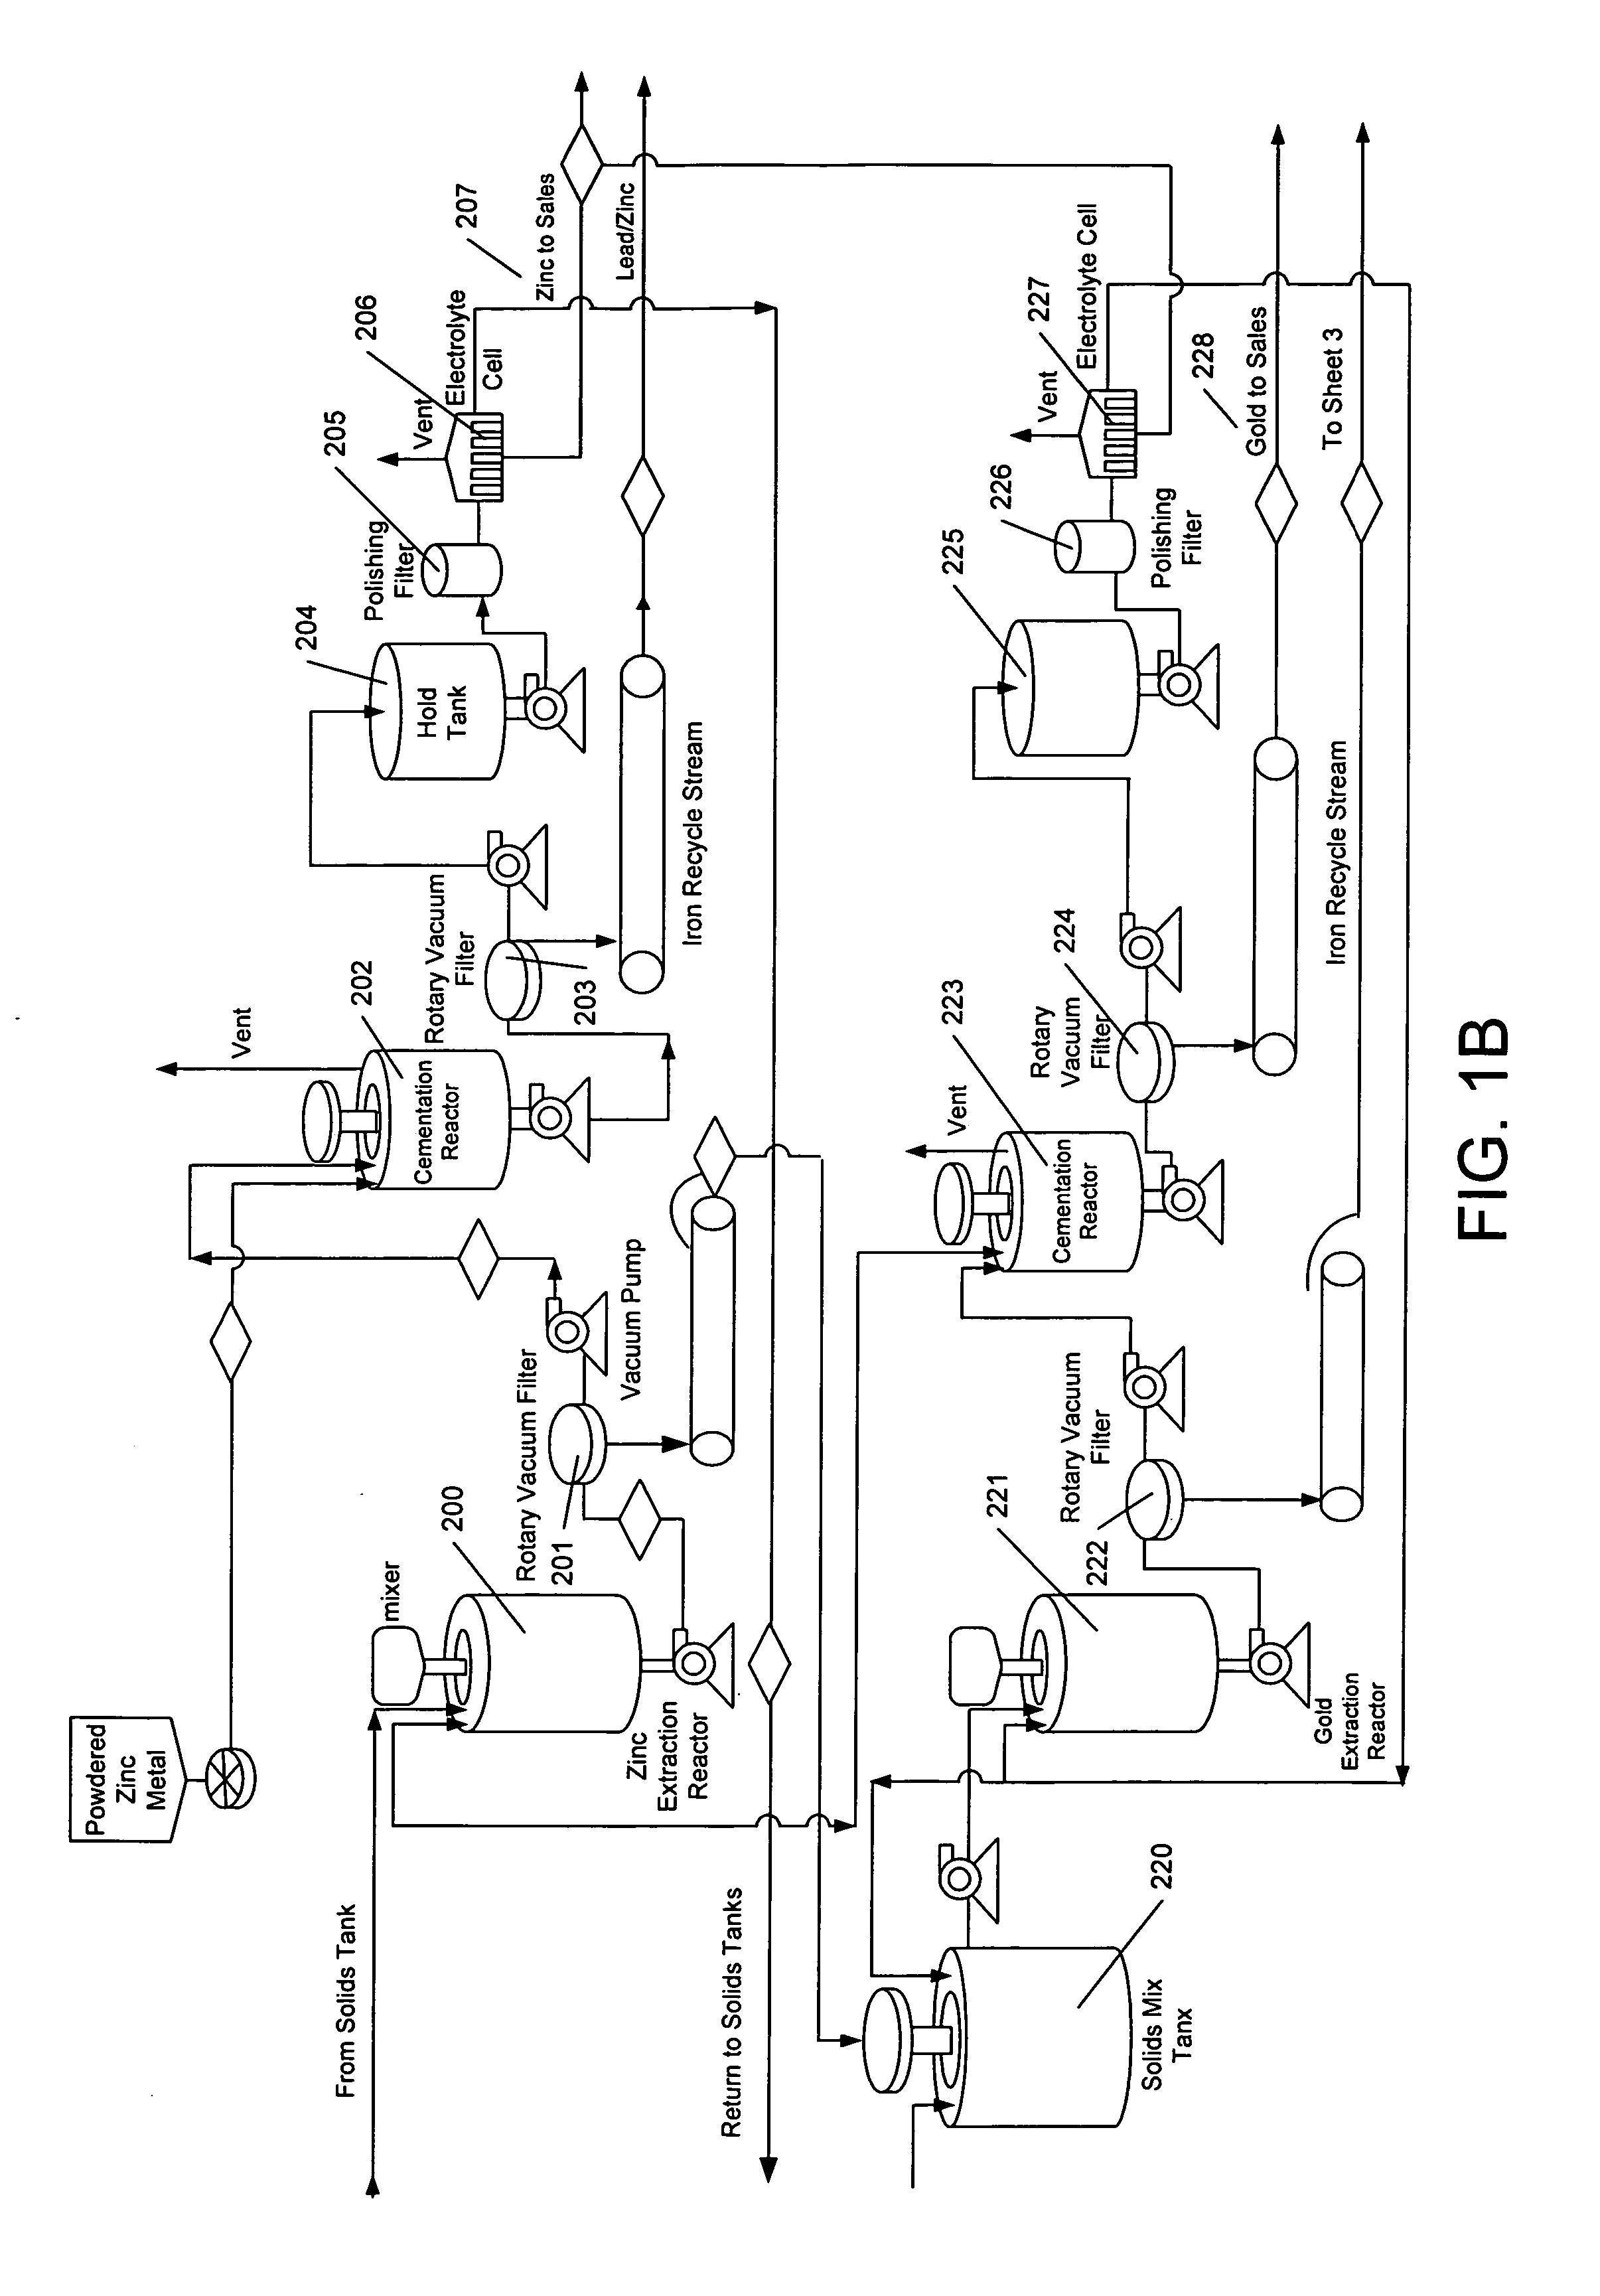 Process for hydrometallurgical treatment of electric arc furnace dust